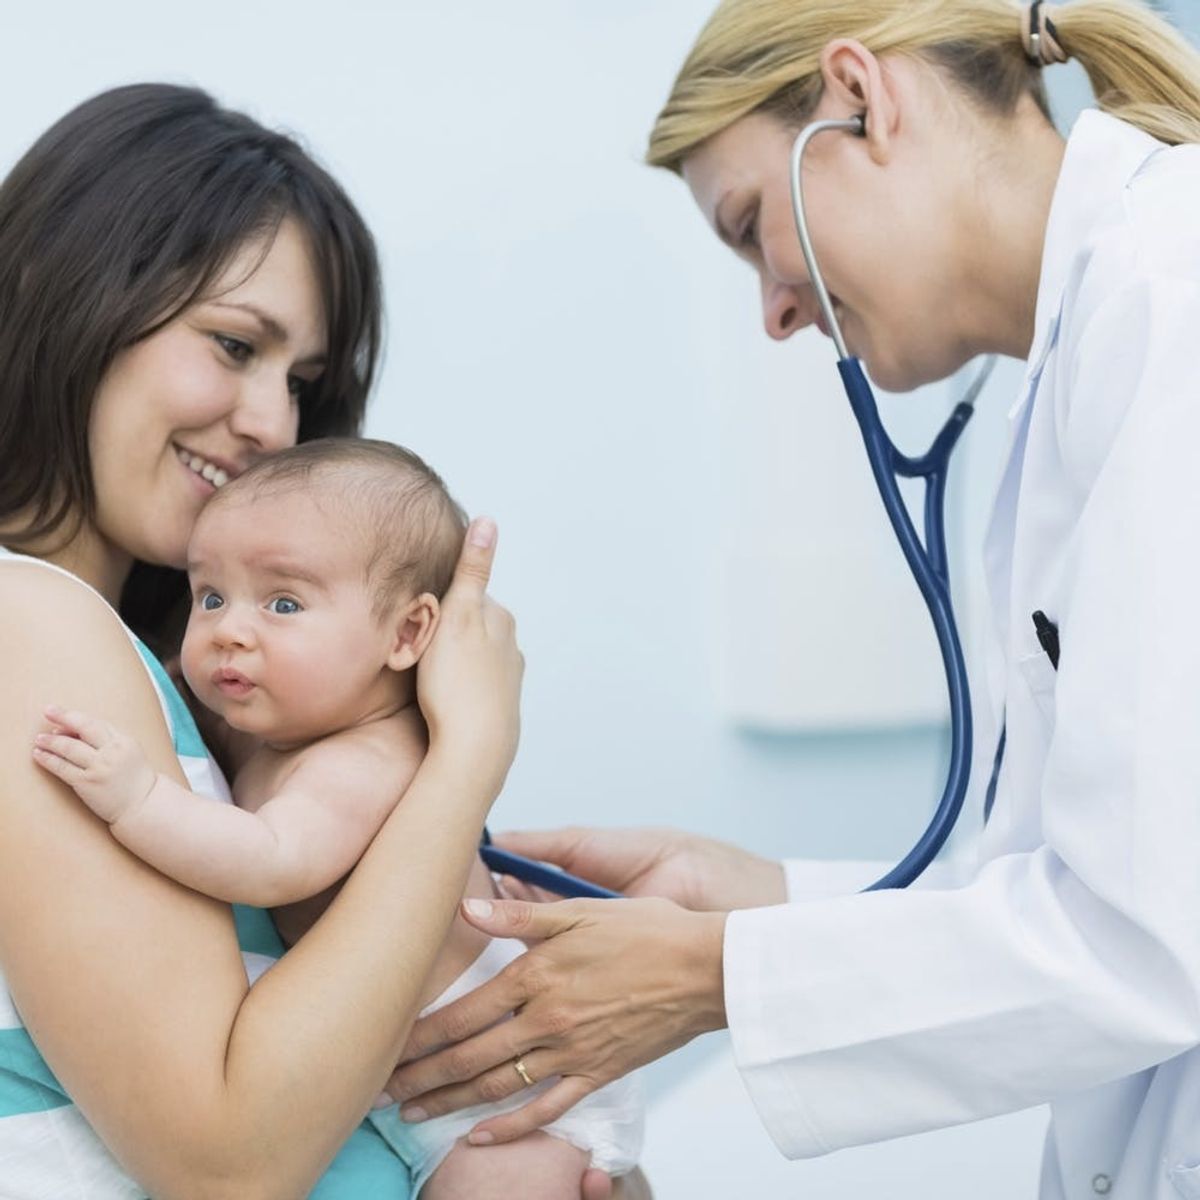 6 Things to Bring to Your Newborn’s First Well-Baby Check Up